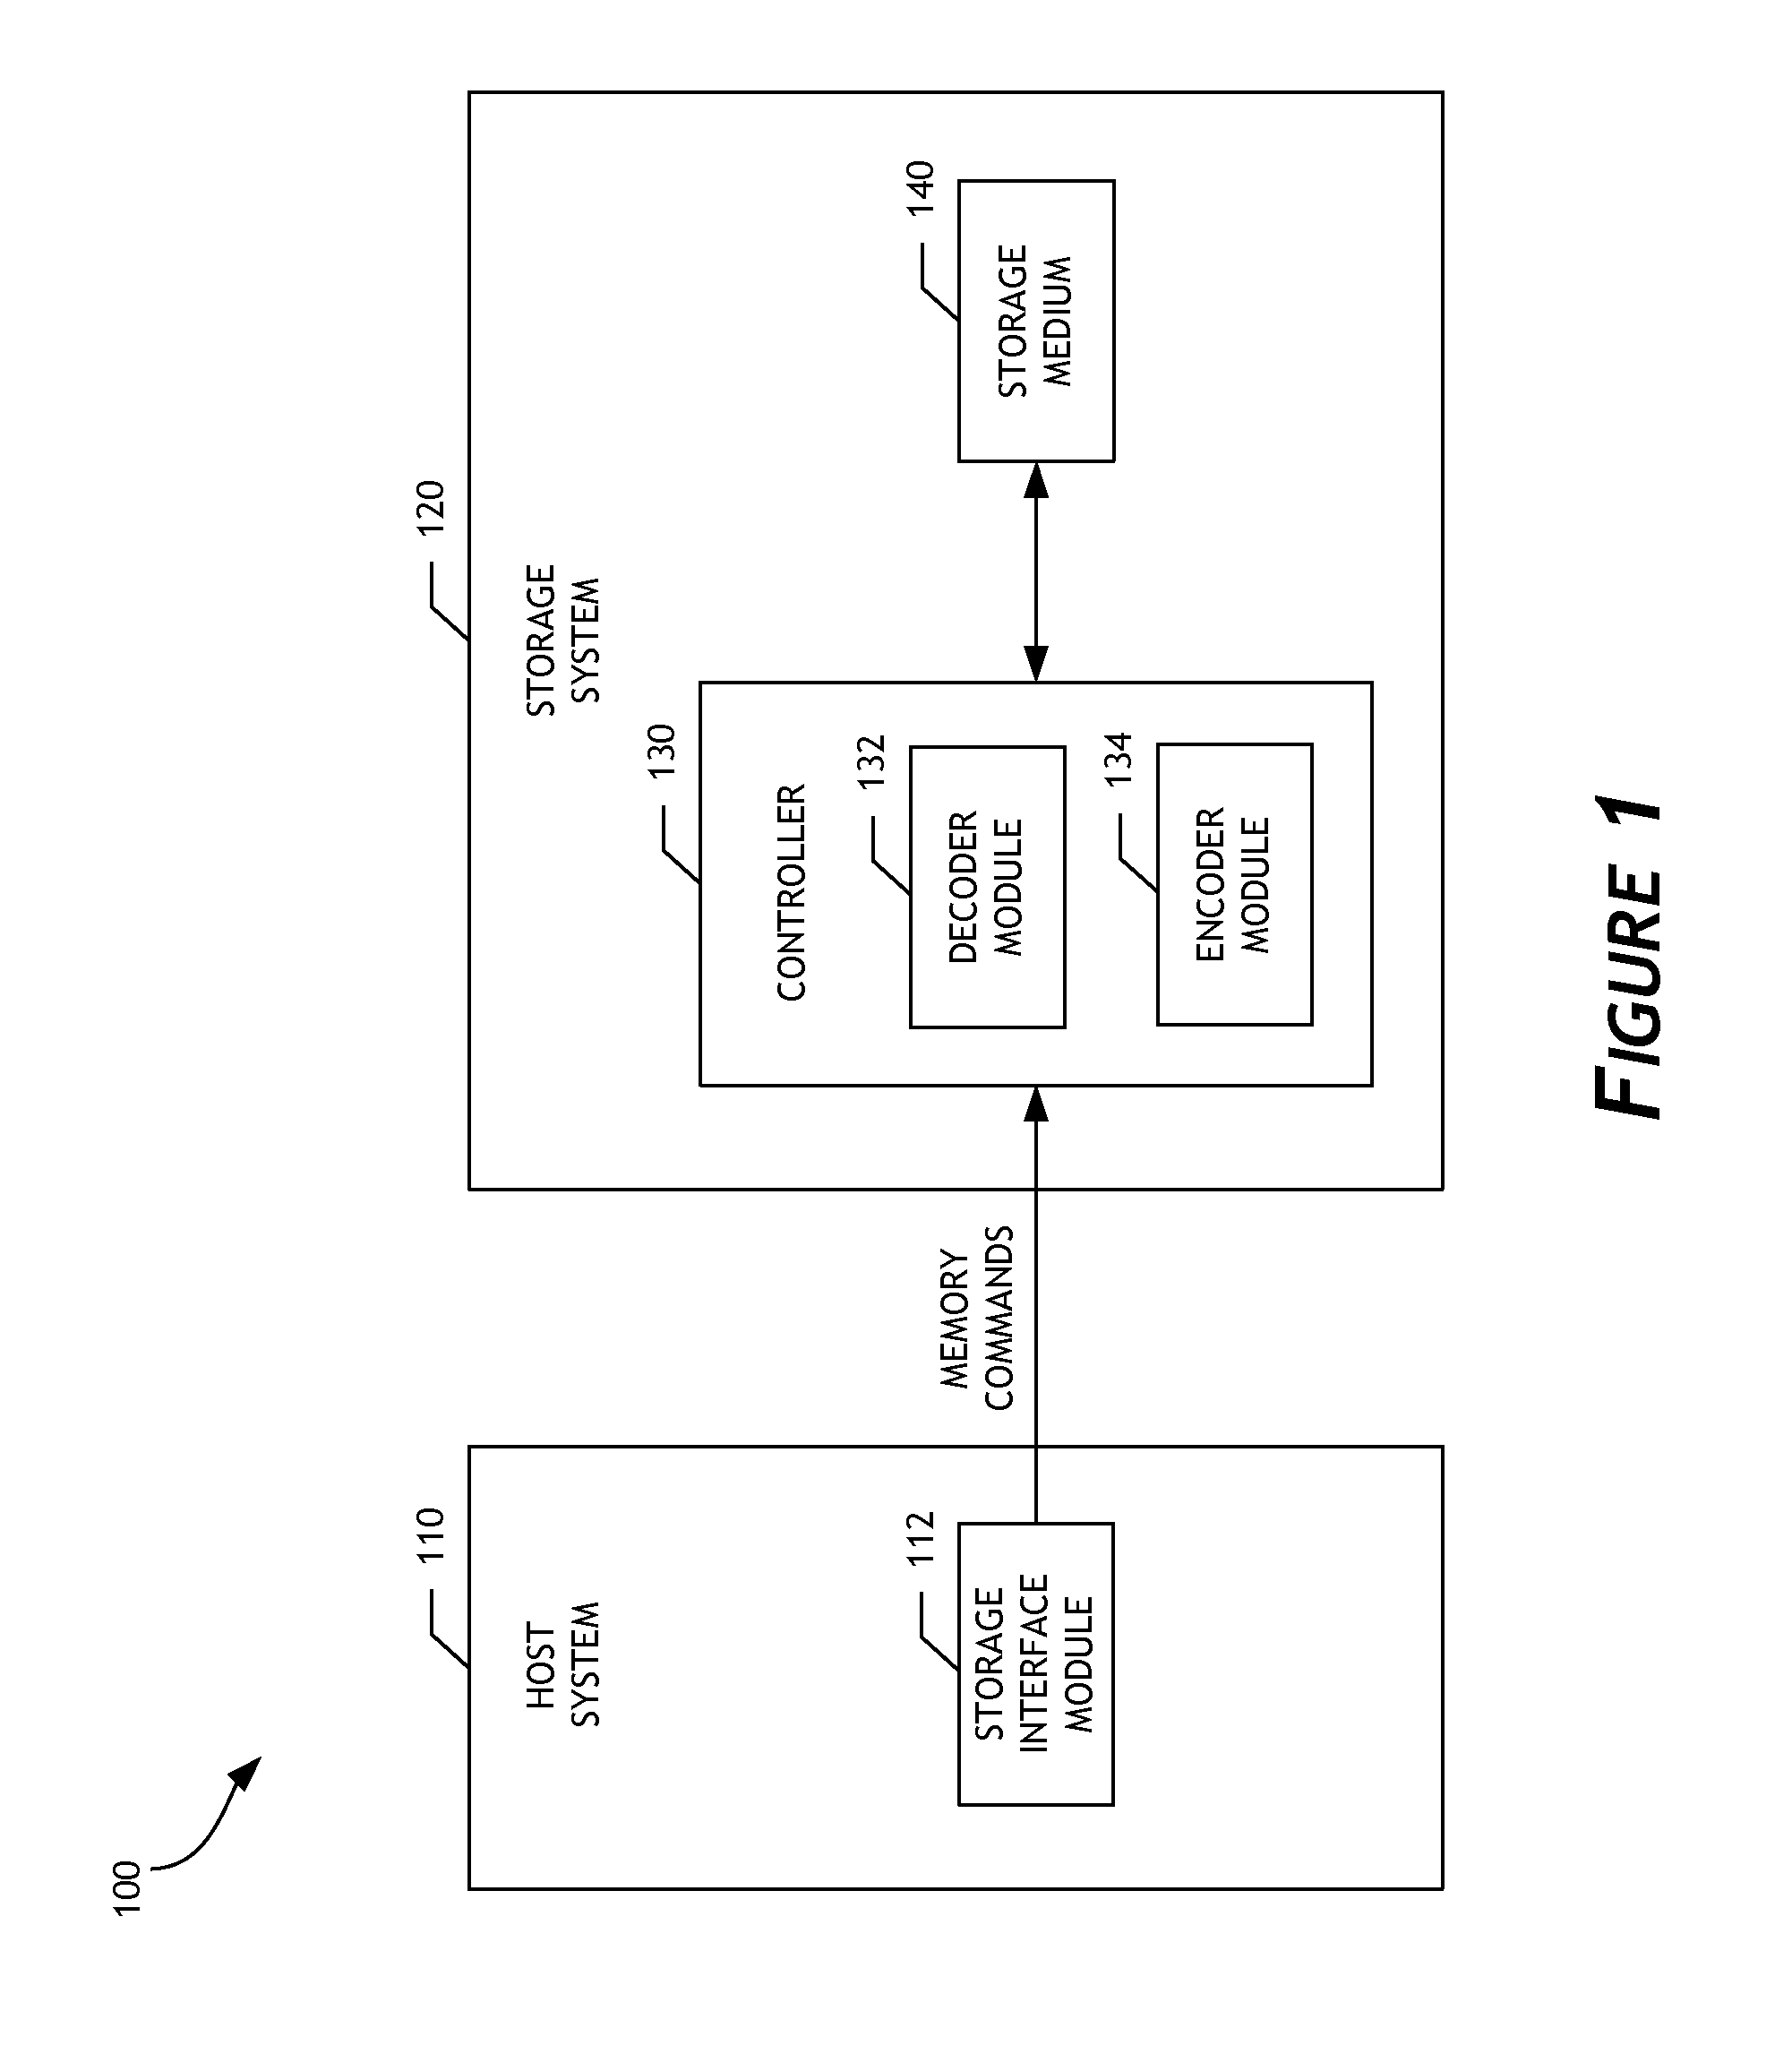 Decoder having early decoding termination detection